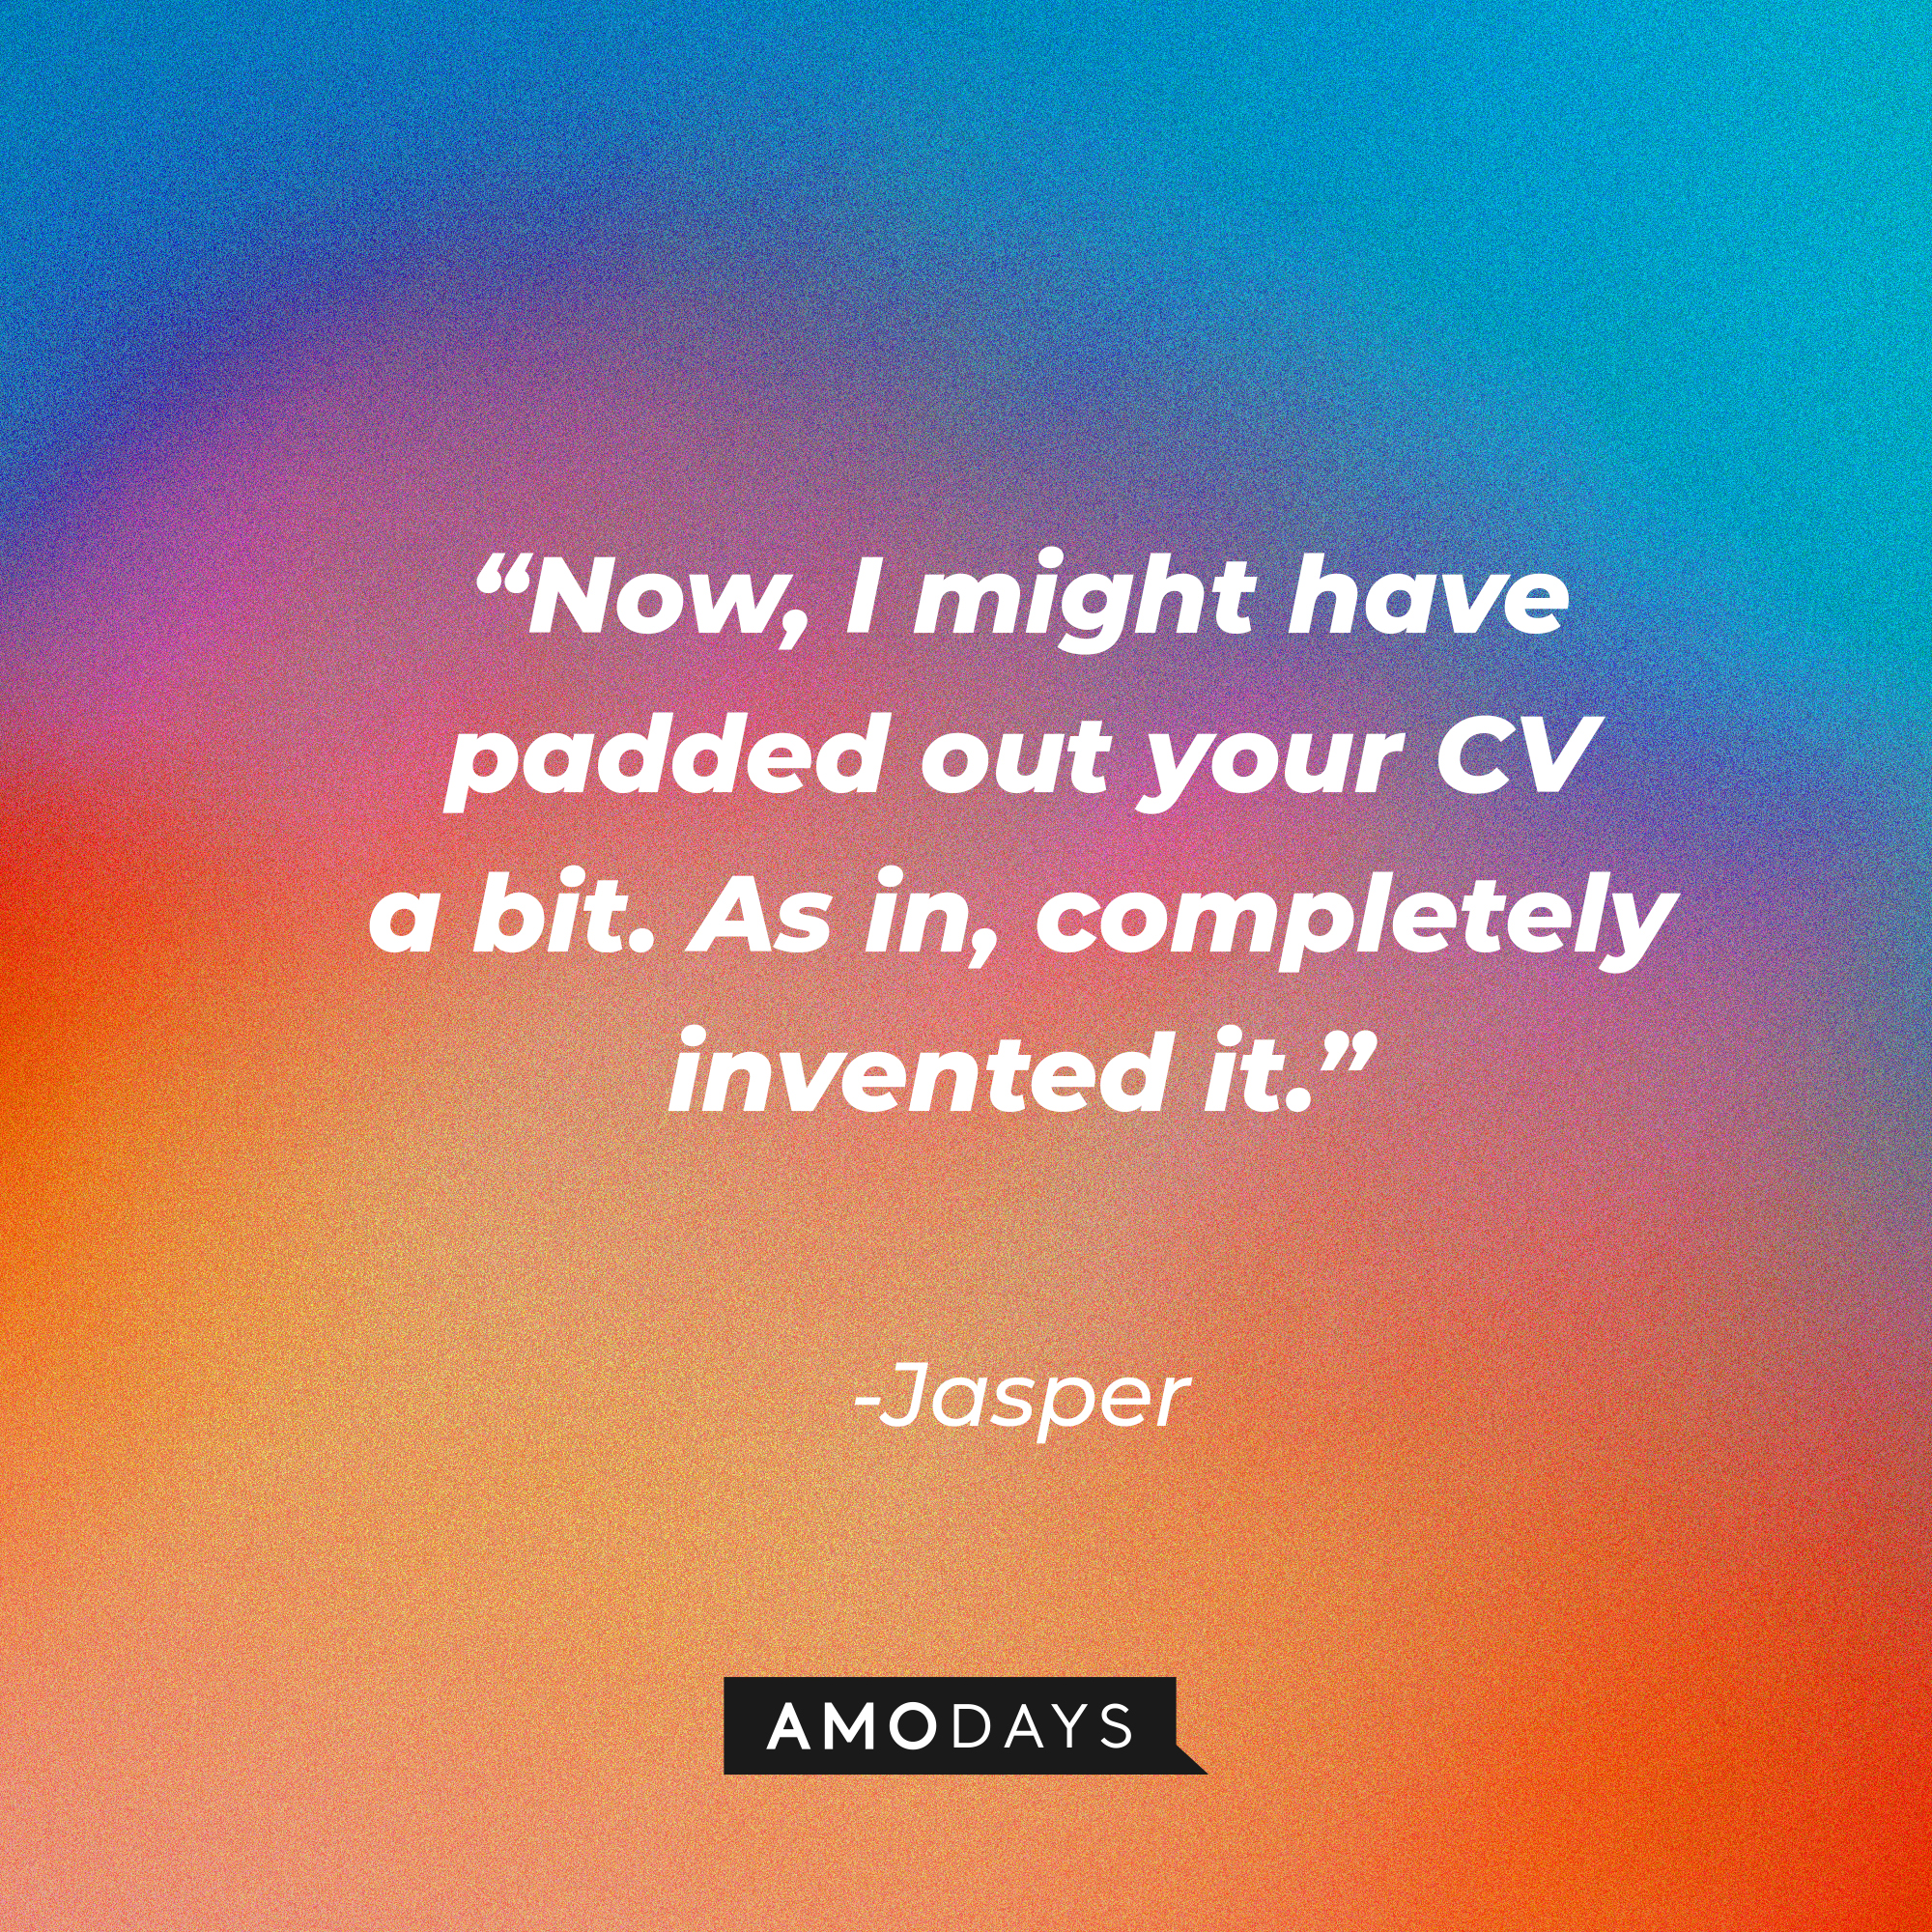 Jasper's quote: "Now, I might have padded out your CV a bit. As in, completely invented it." | Source: Amodays